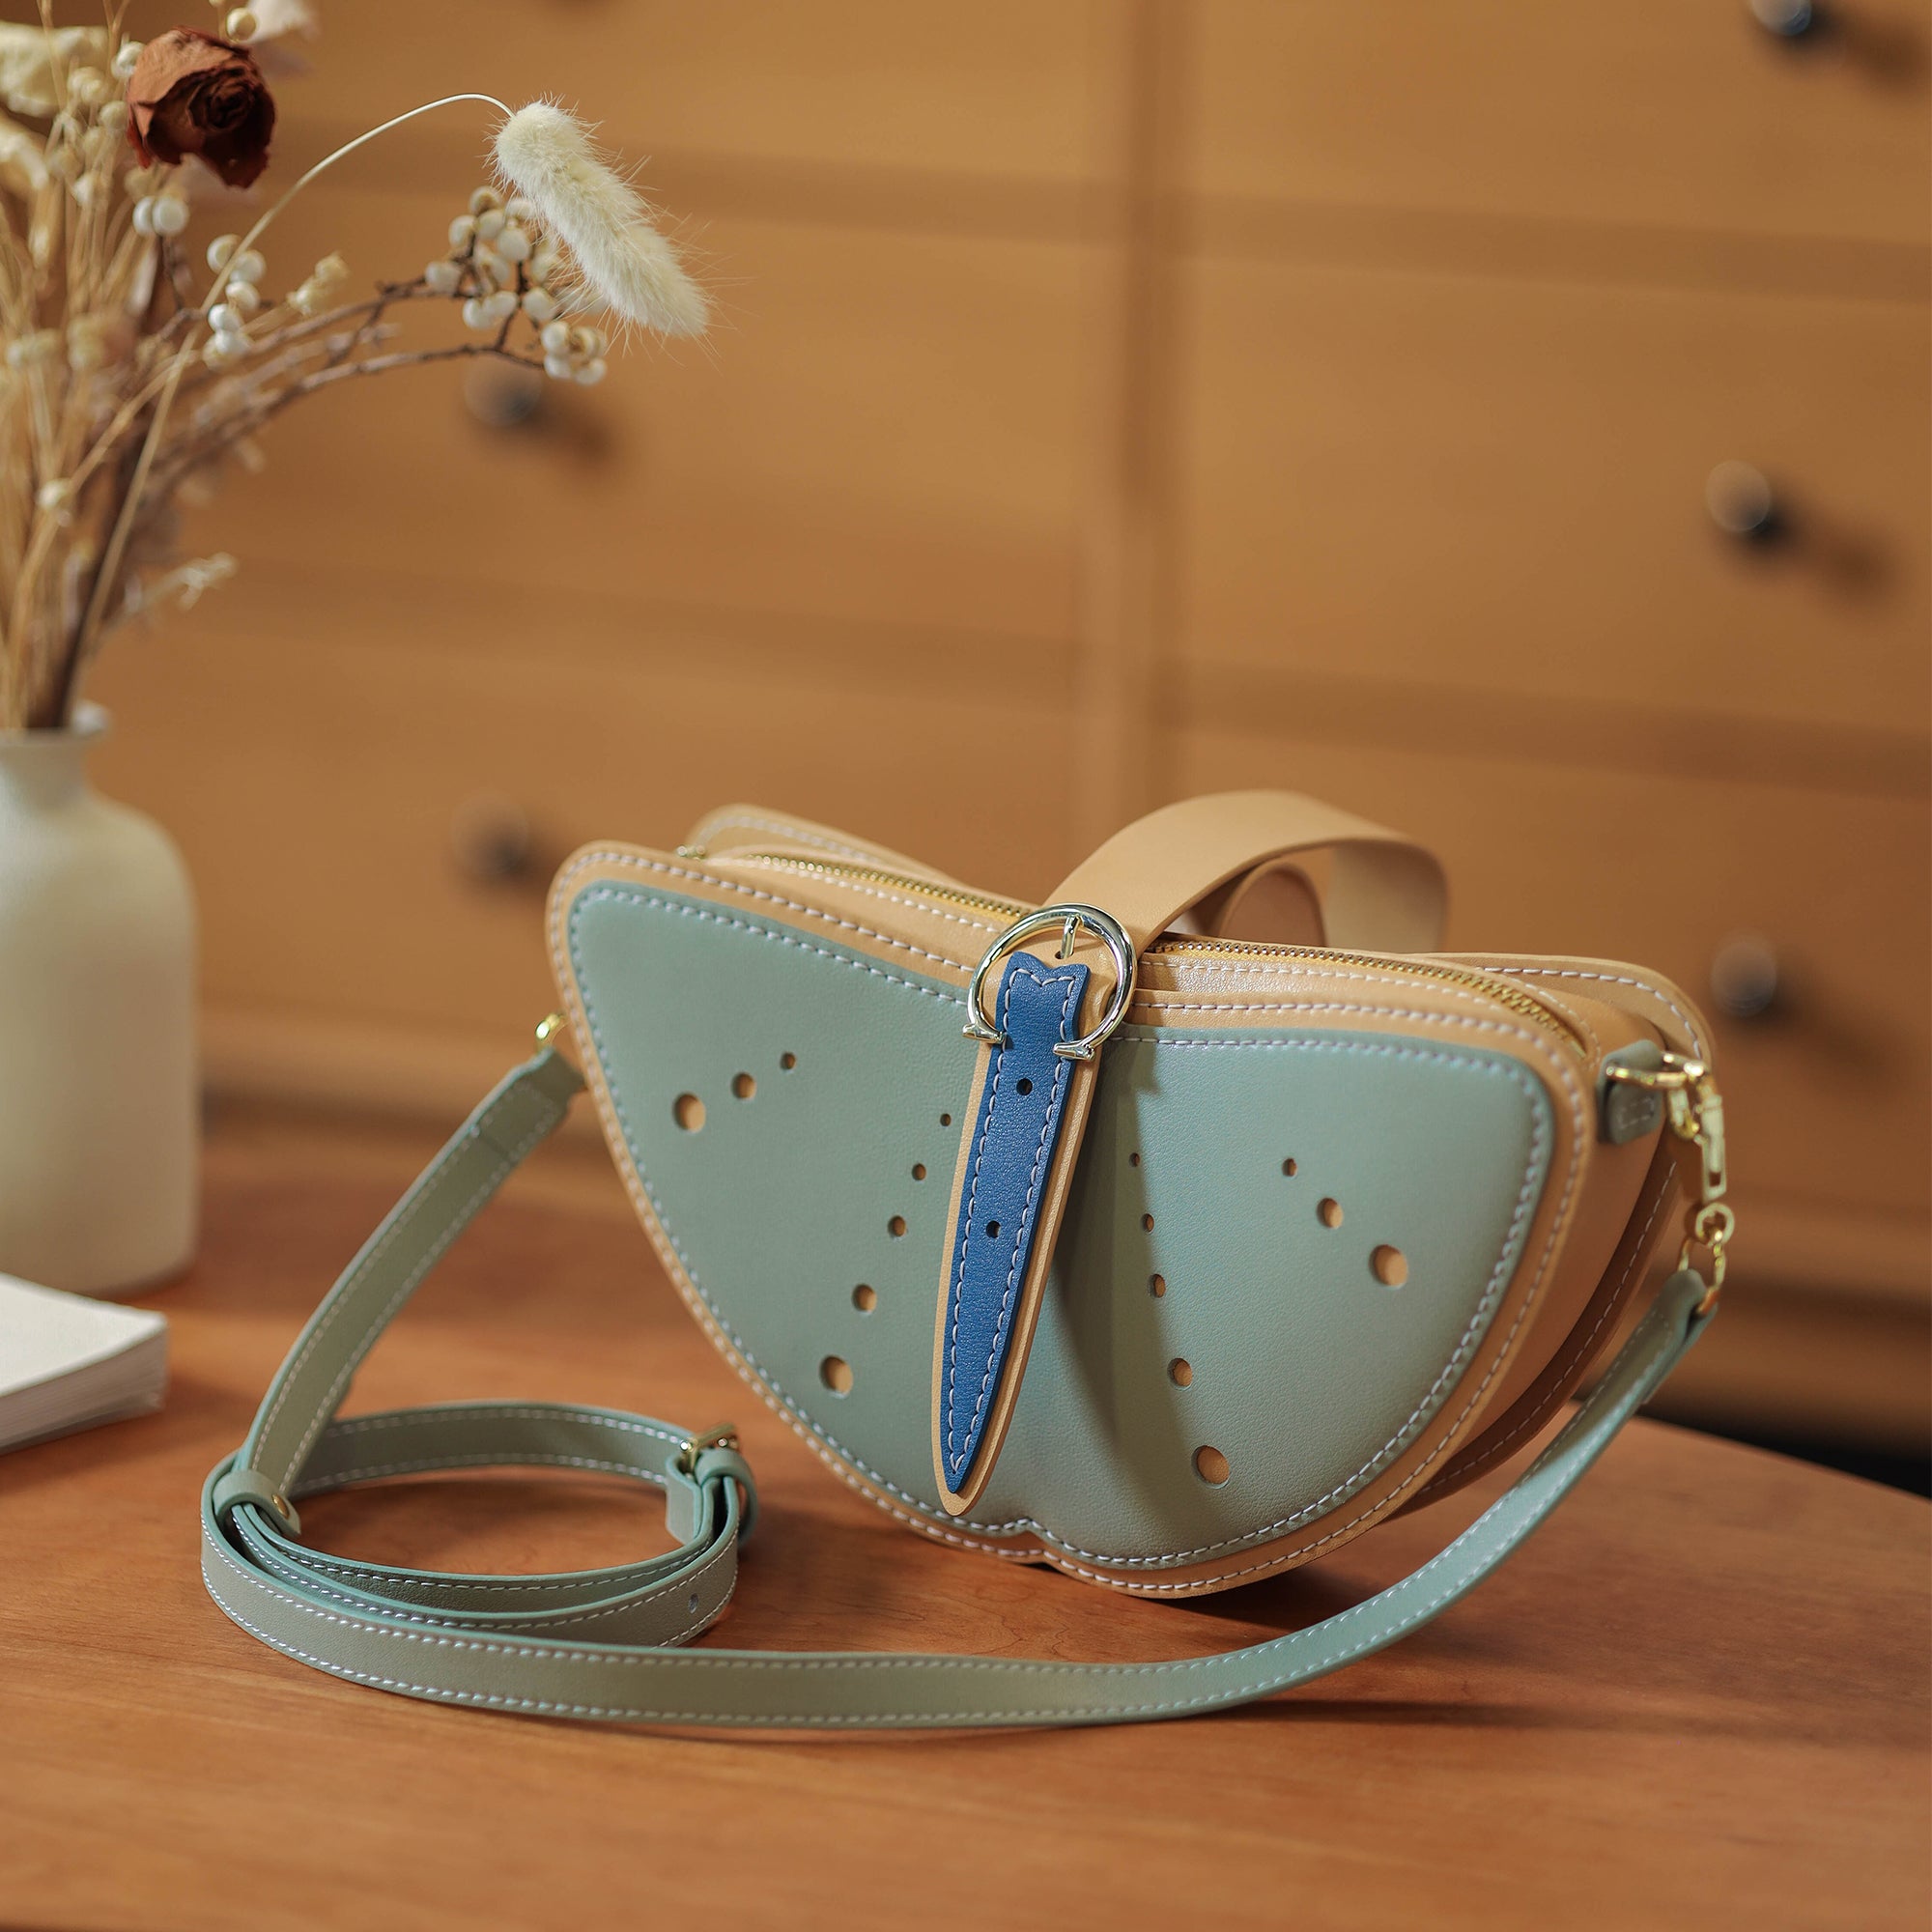 Flying Butterfly Leather Bag Kit